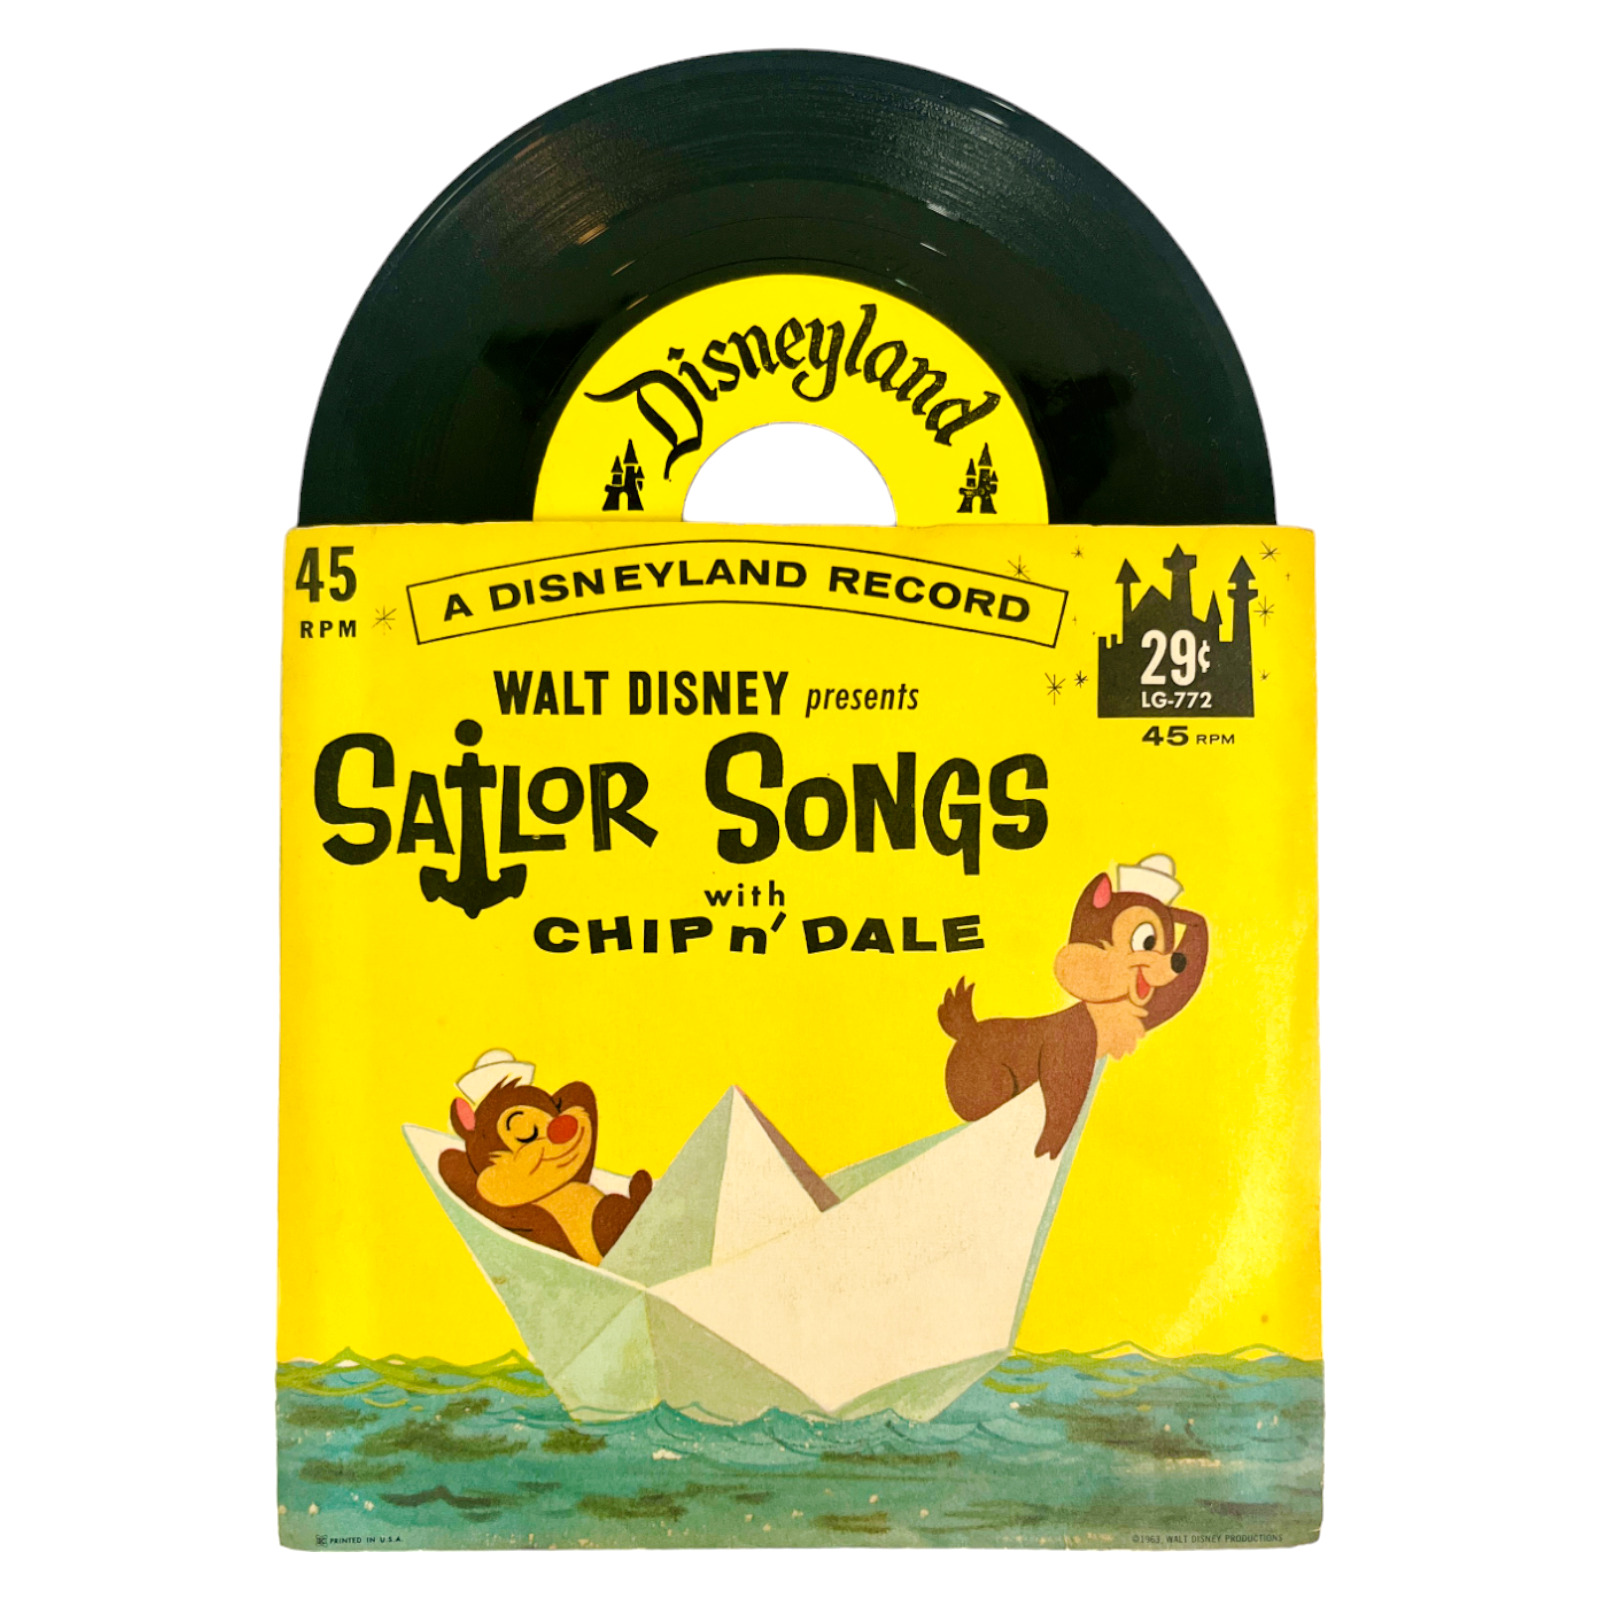 Chip and Dale Record Sailor Songs 45rpm Disney Disneyland #LG-772 Vintage 1963